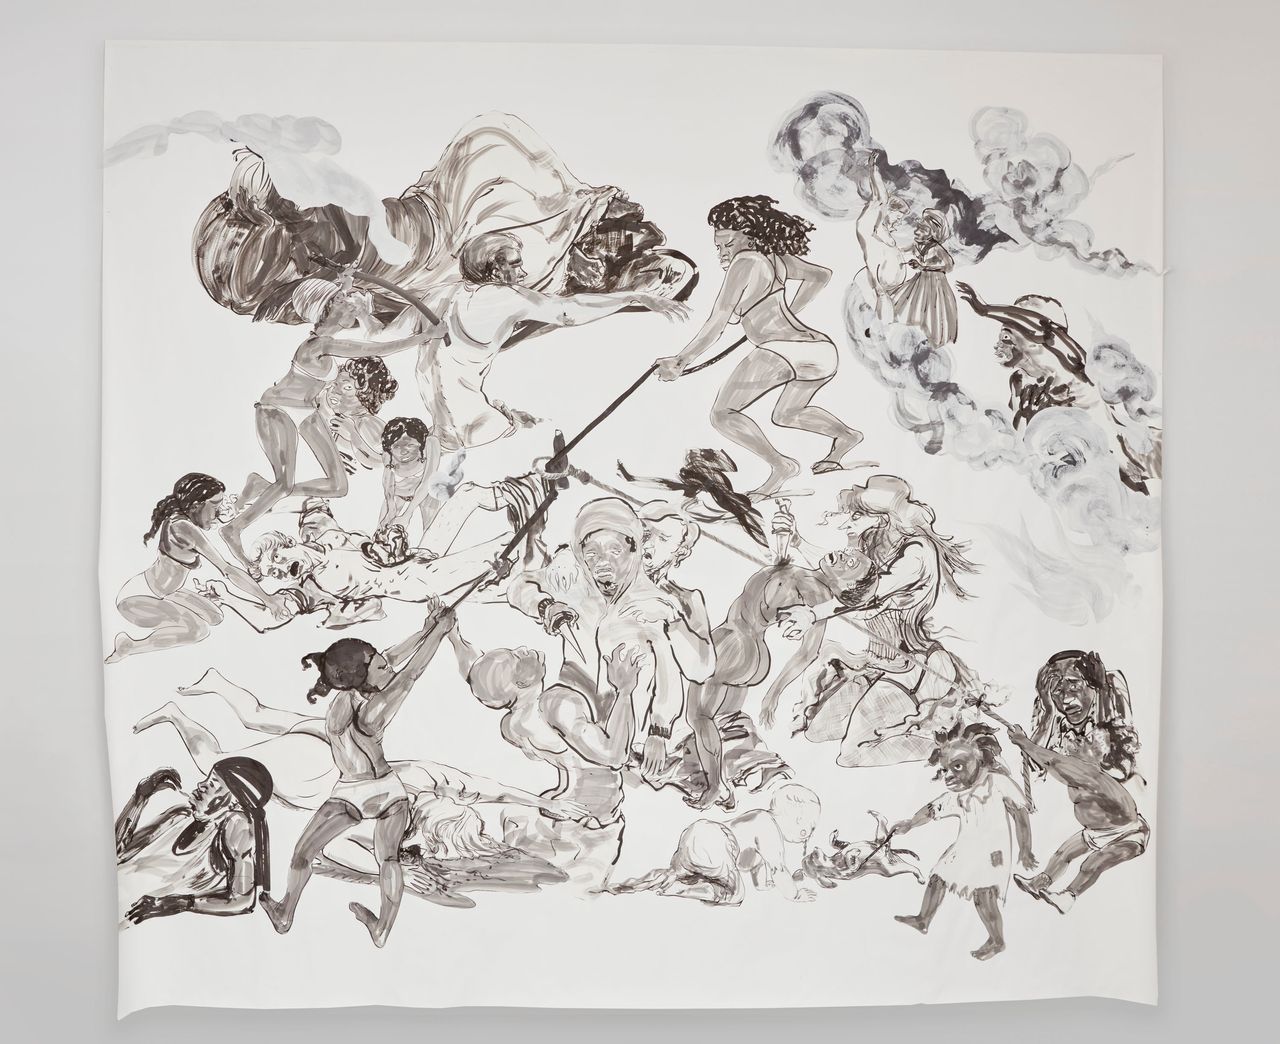 Kara Walker, "The Pool Party of Sardanapalus (after Delacroix, Kienholz)," 2017, Sumi ink and collage on paper, 126.5 by 140 inches.